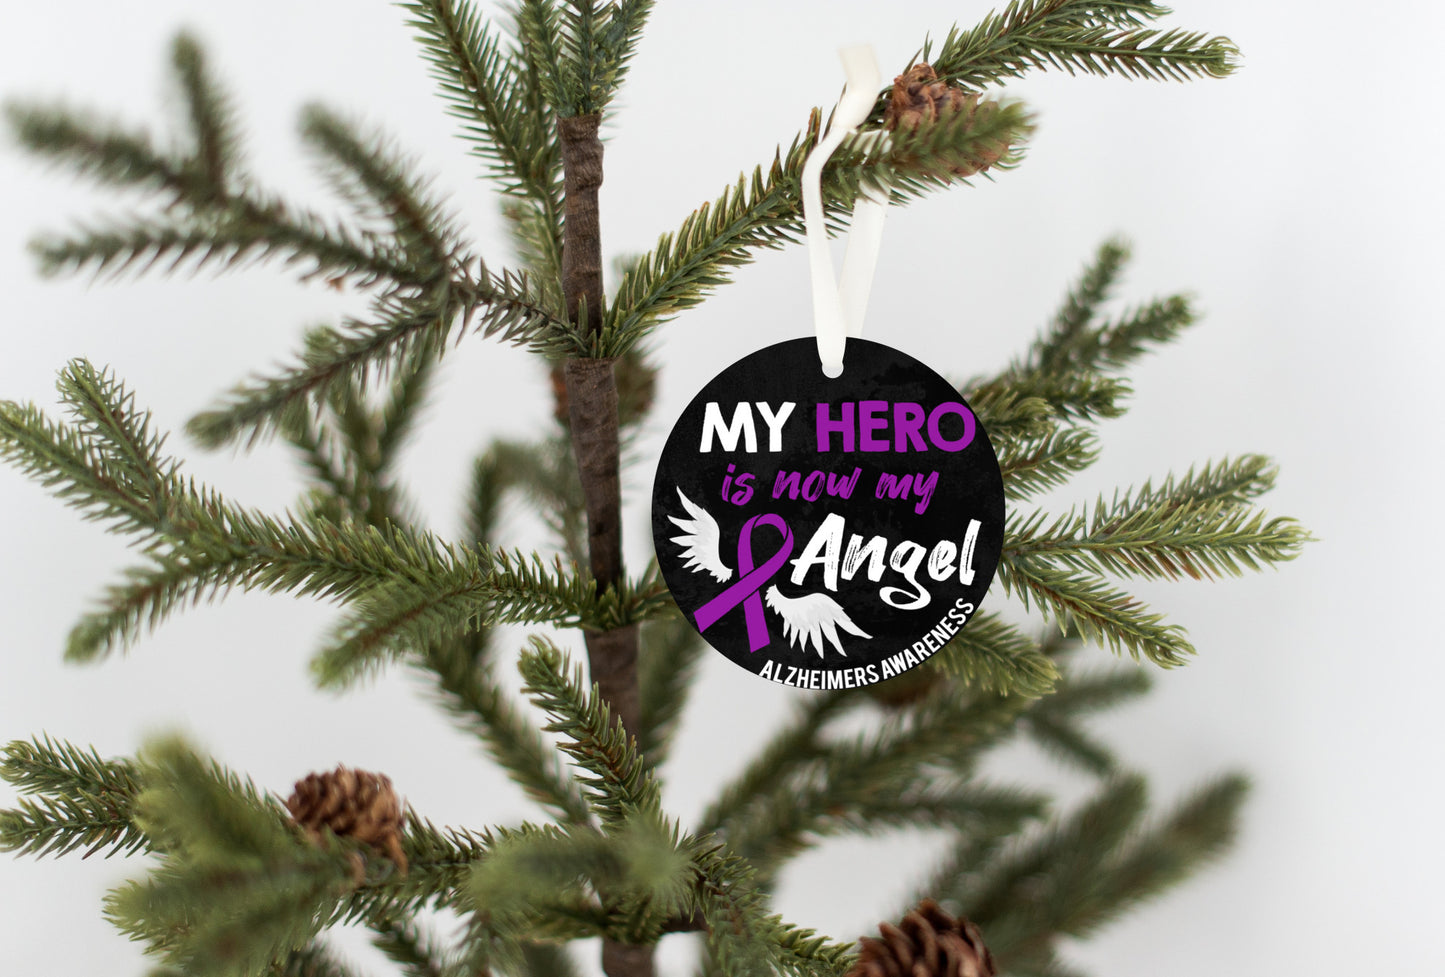 My Hero Is Now My Angel Alzheimer's Awareness Ornament